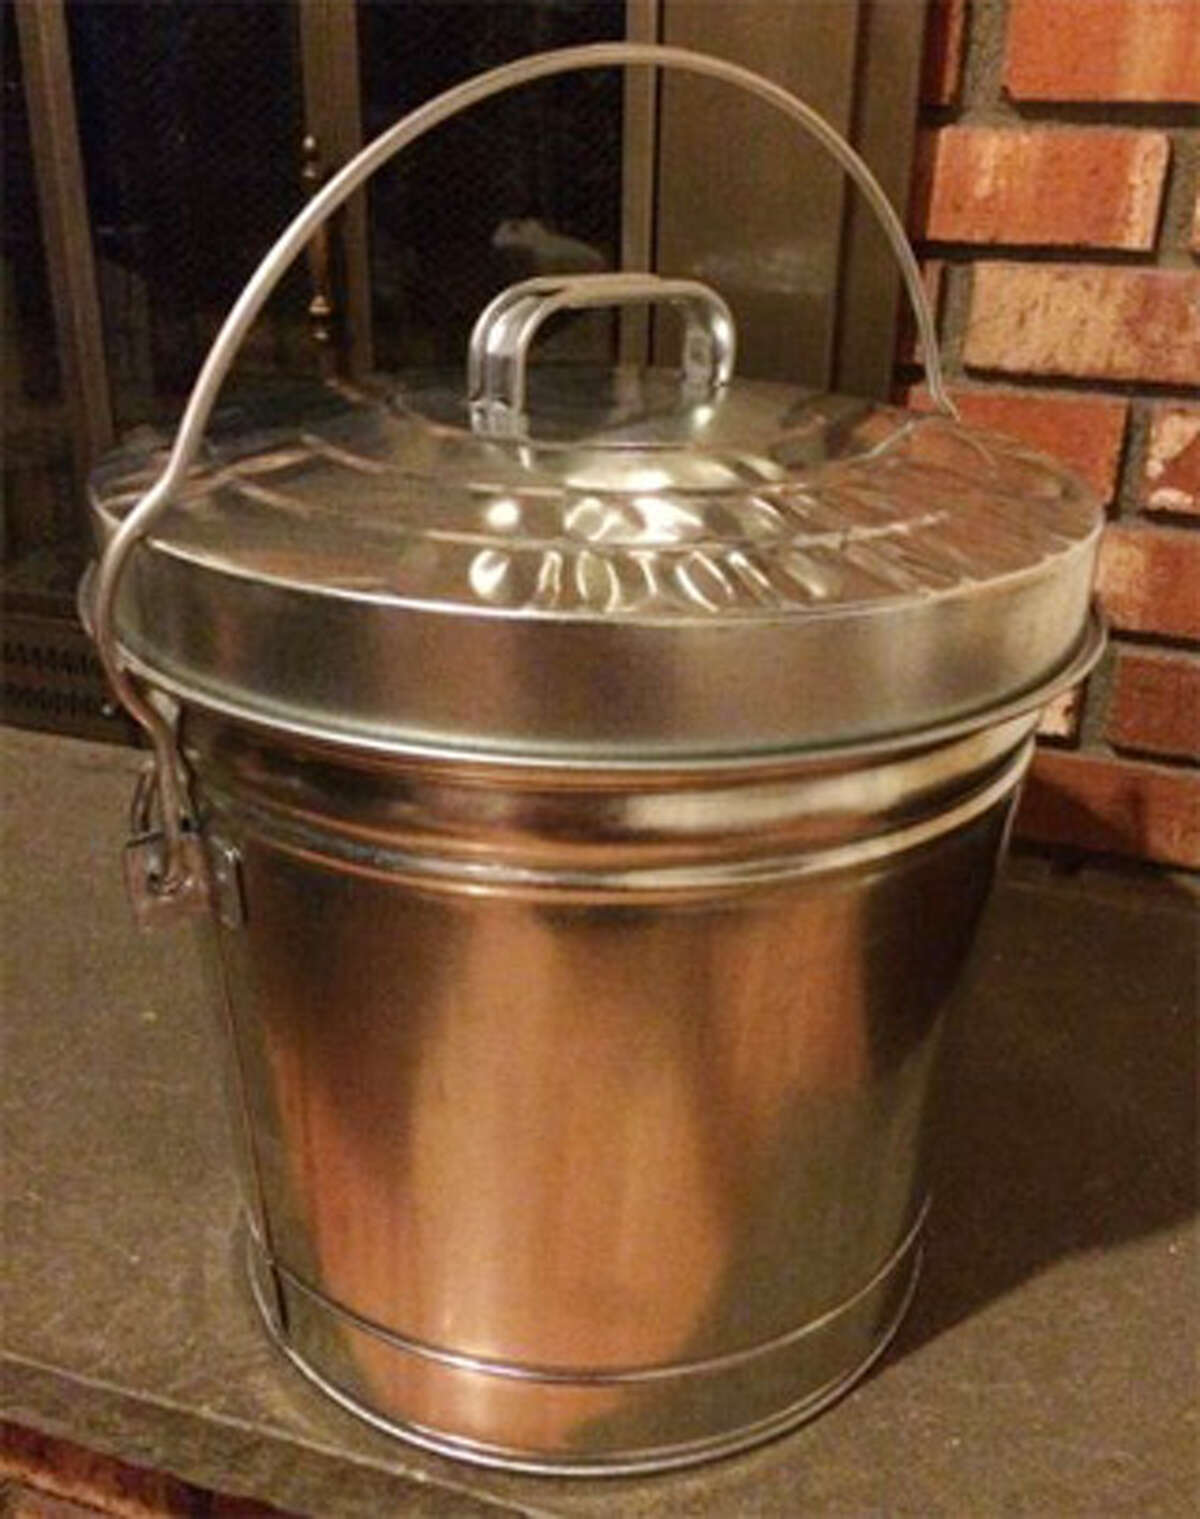 This is a proper container for removing and storing ashes from fireplaces and wood stoves.